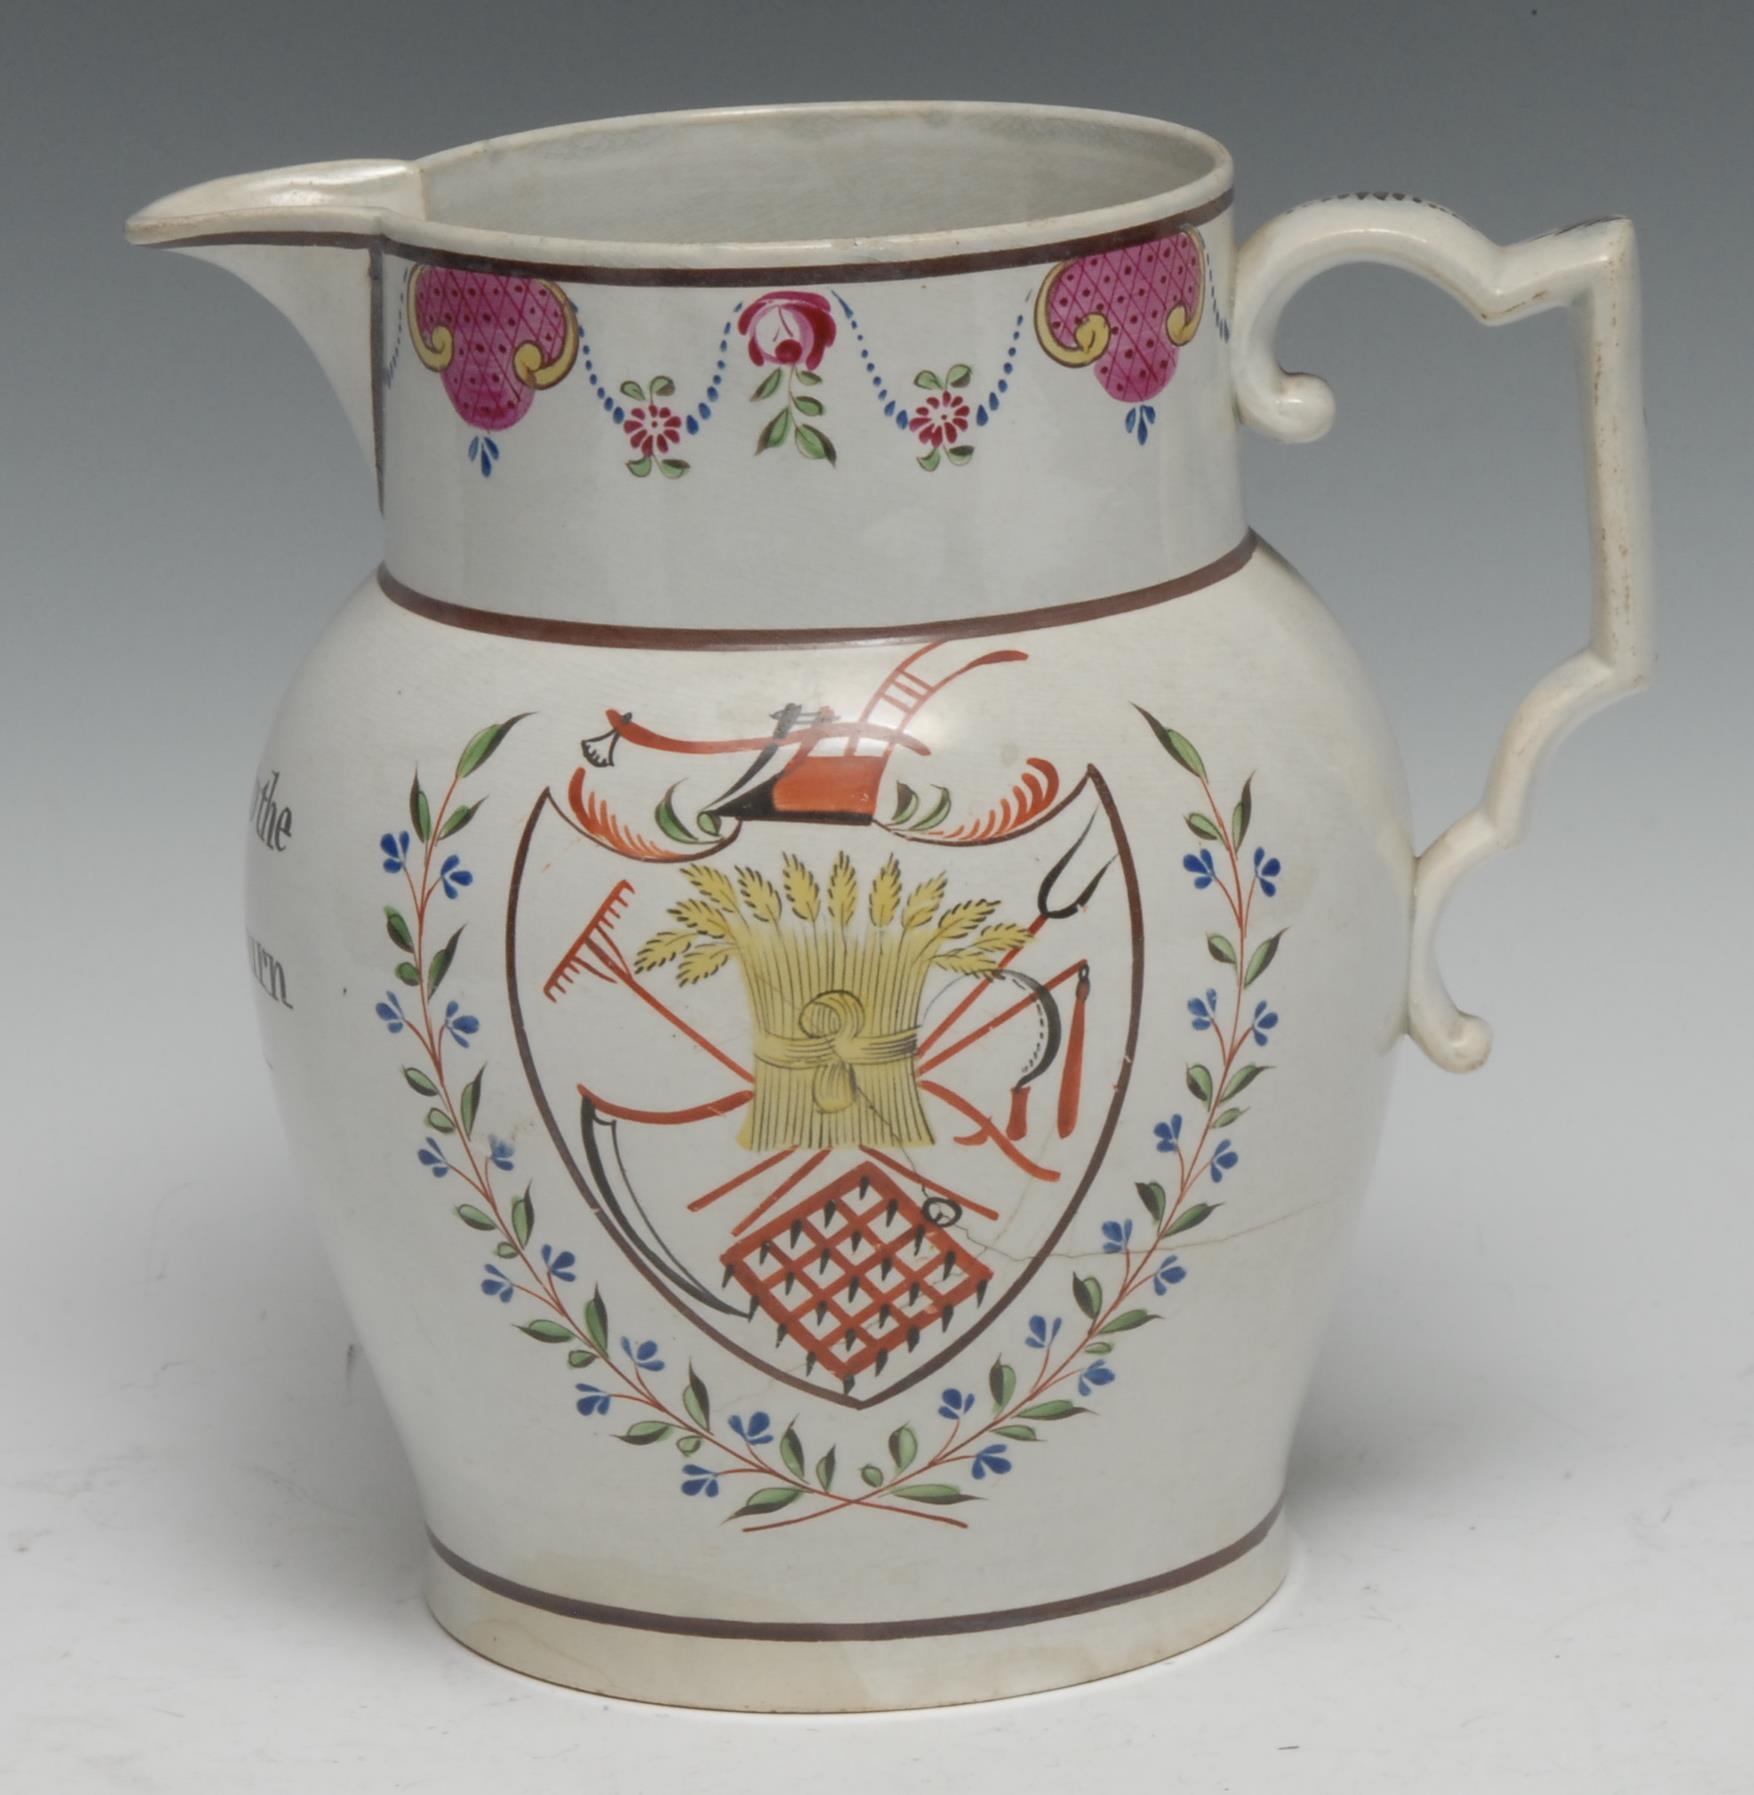 An early 20th century Pearlware jug, Success to the Grain Return, painted with a shield with farming